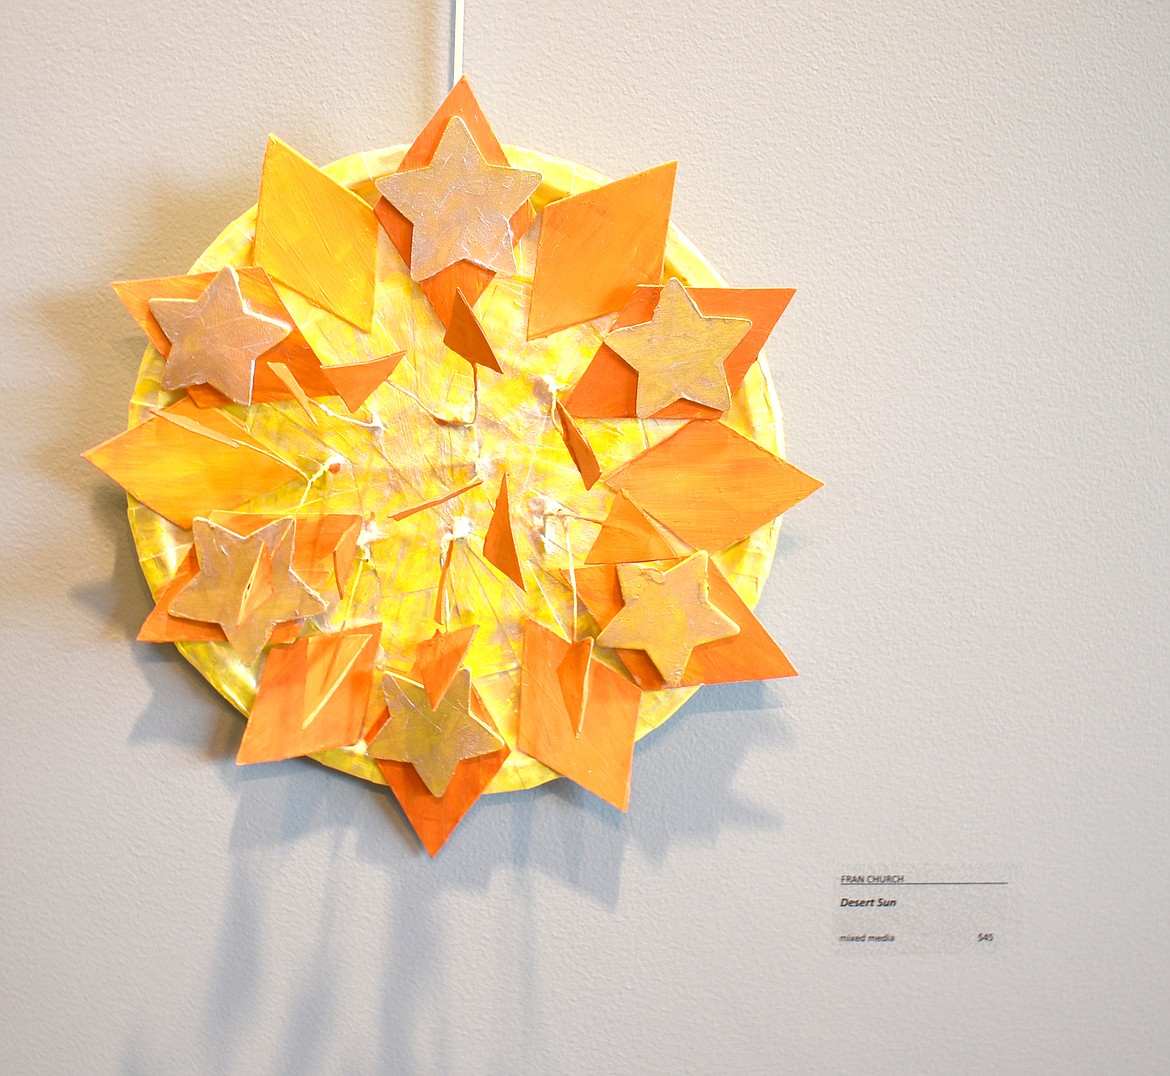 This piece, called simply “Desert Sun,” reflects Fran Church’s love of the bright sunshine in Moses Lake.